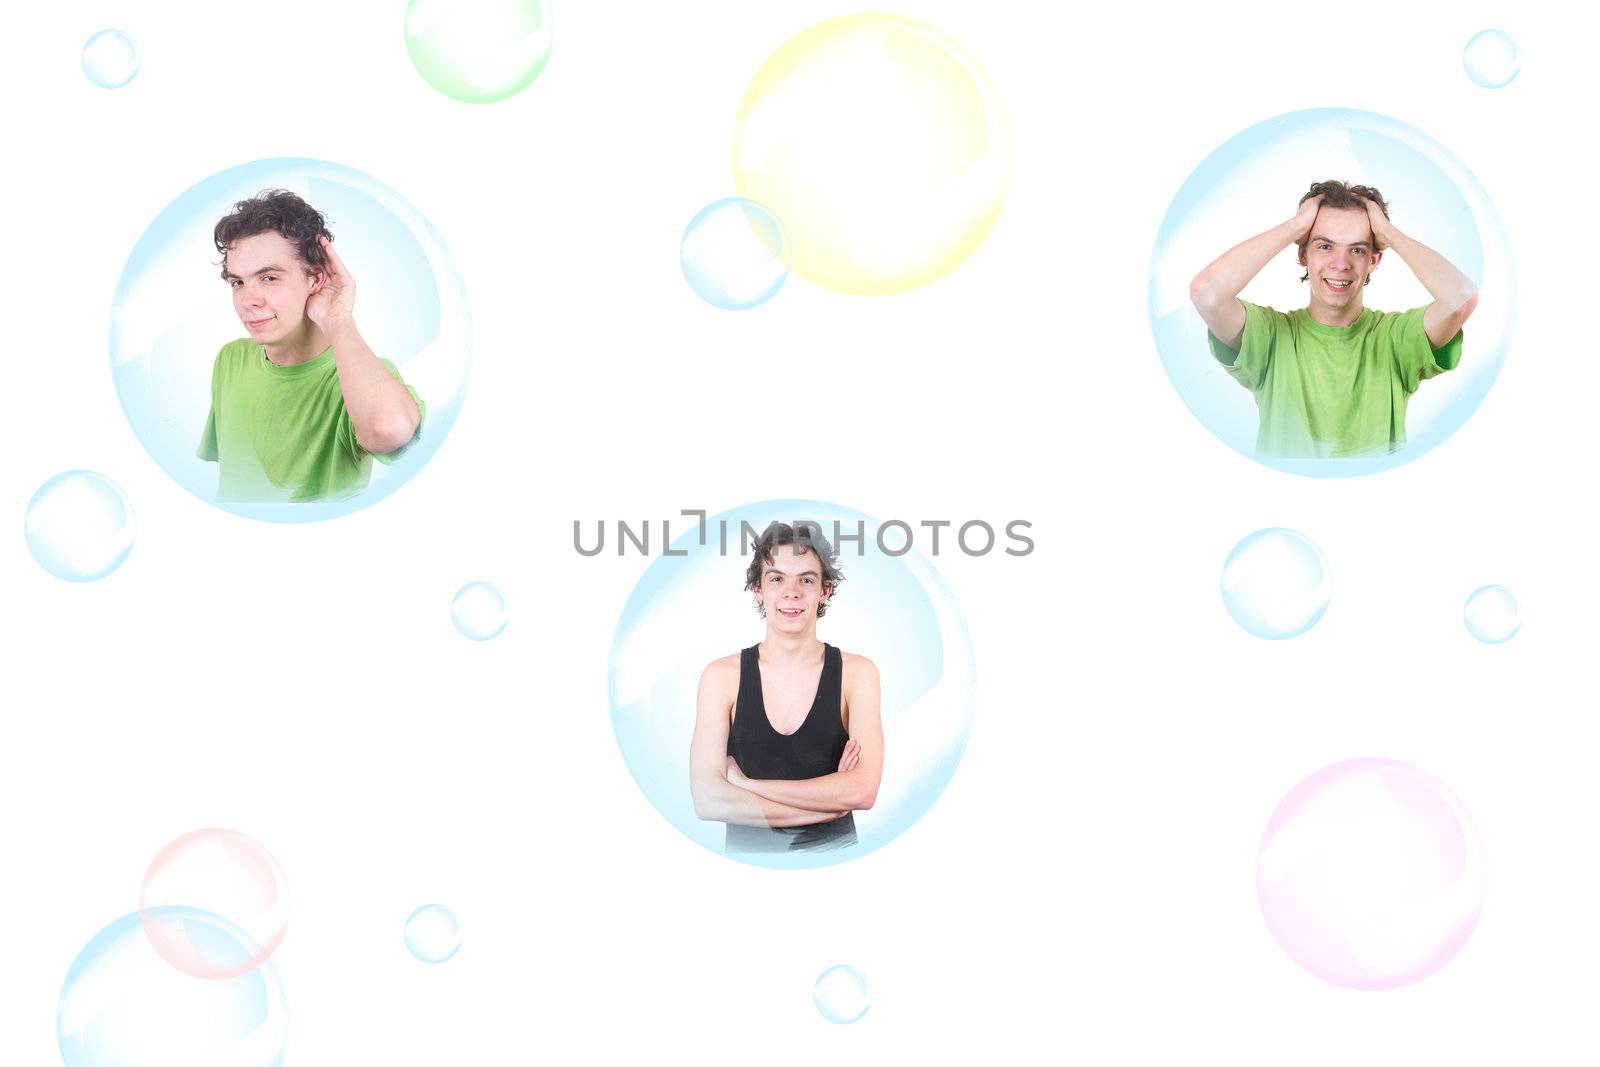 The boy and soap bubbles by petrkurgan